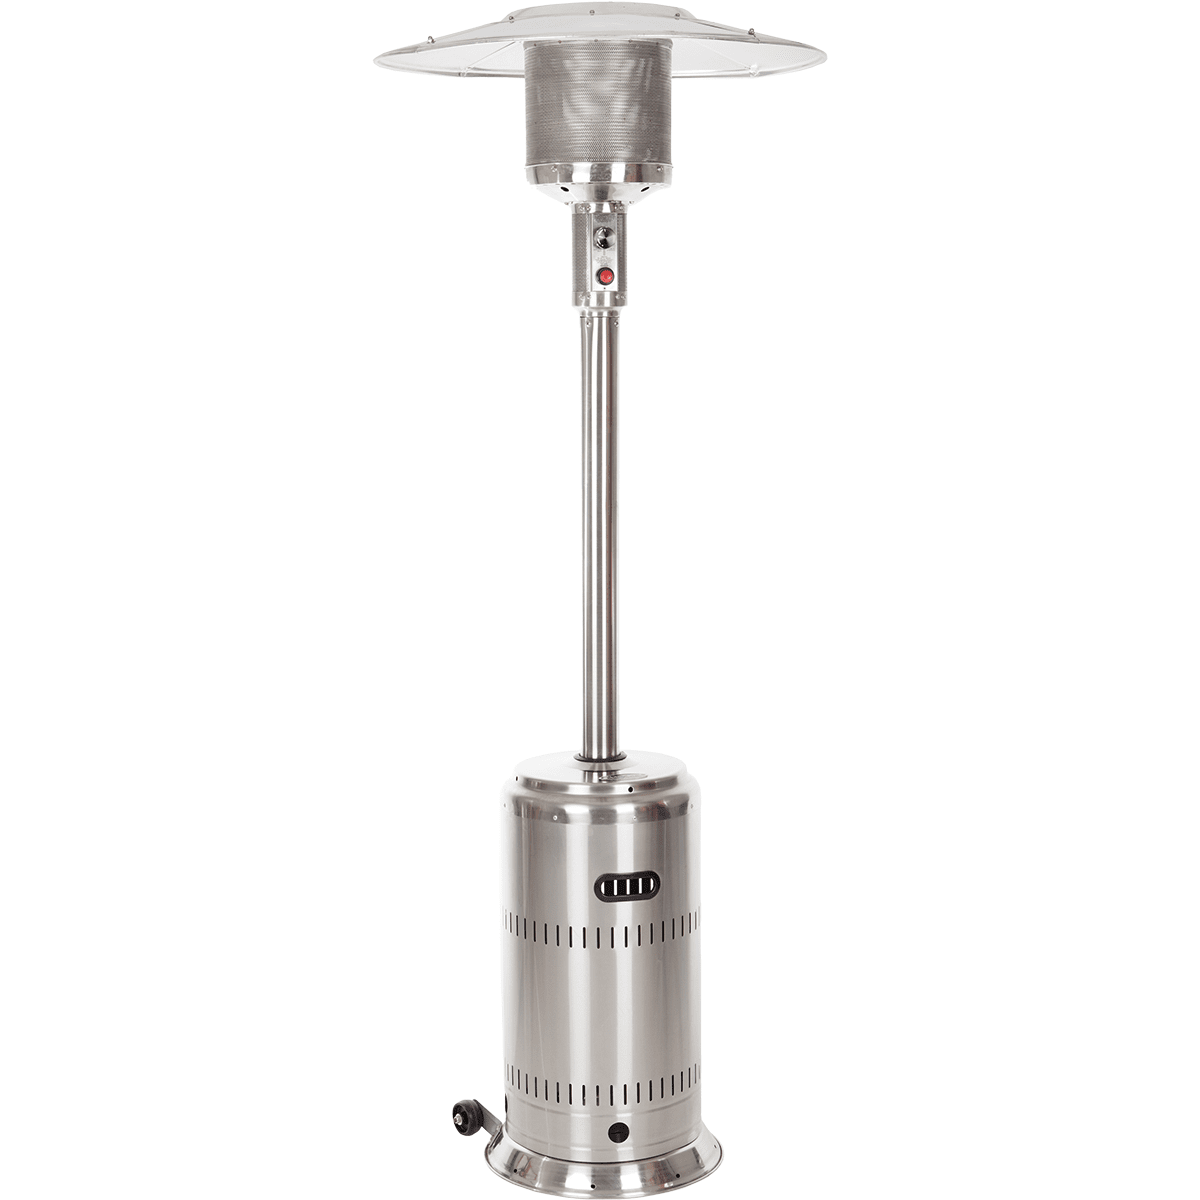 Fire Sense Commercial Patio Heater Stainless Steel Finish (01775)